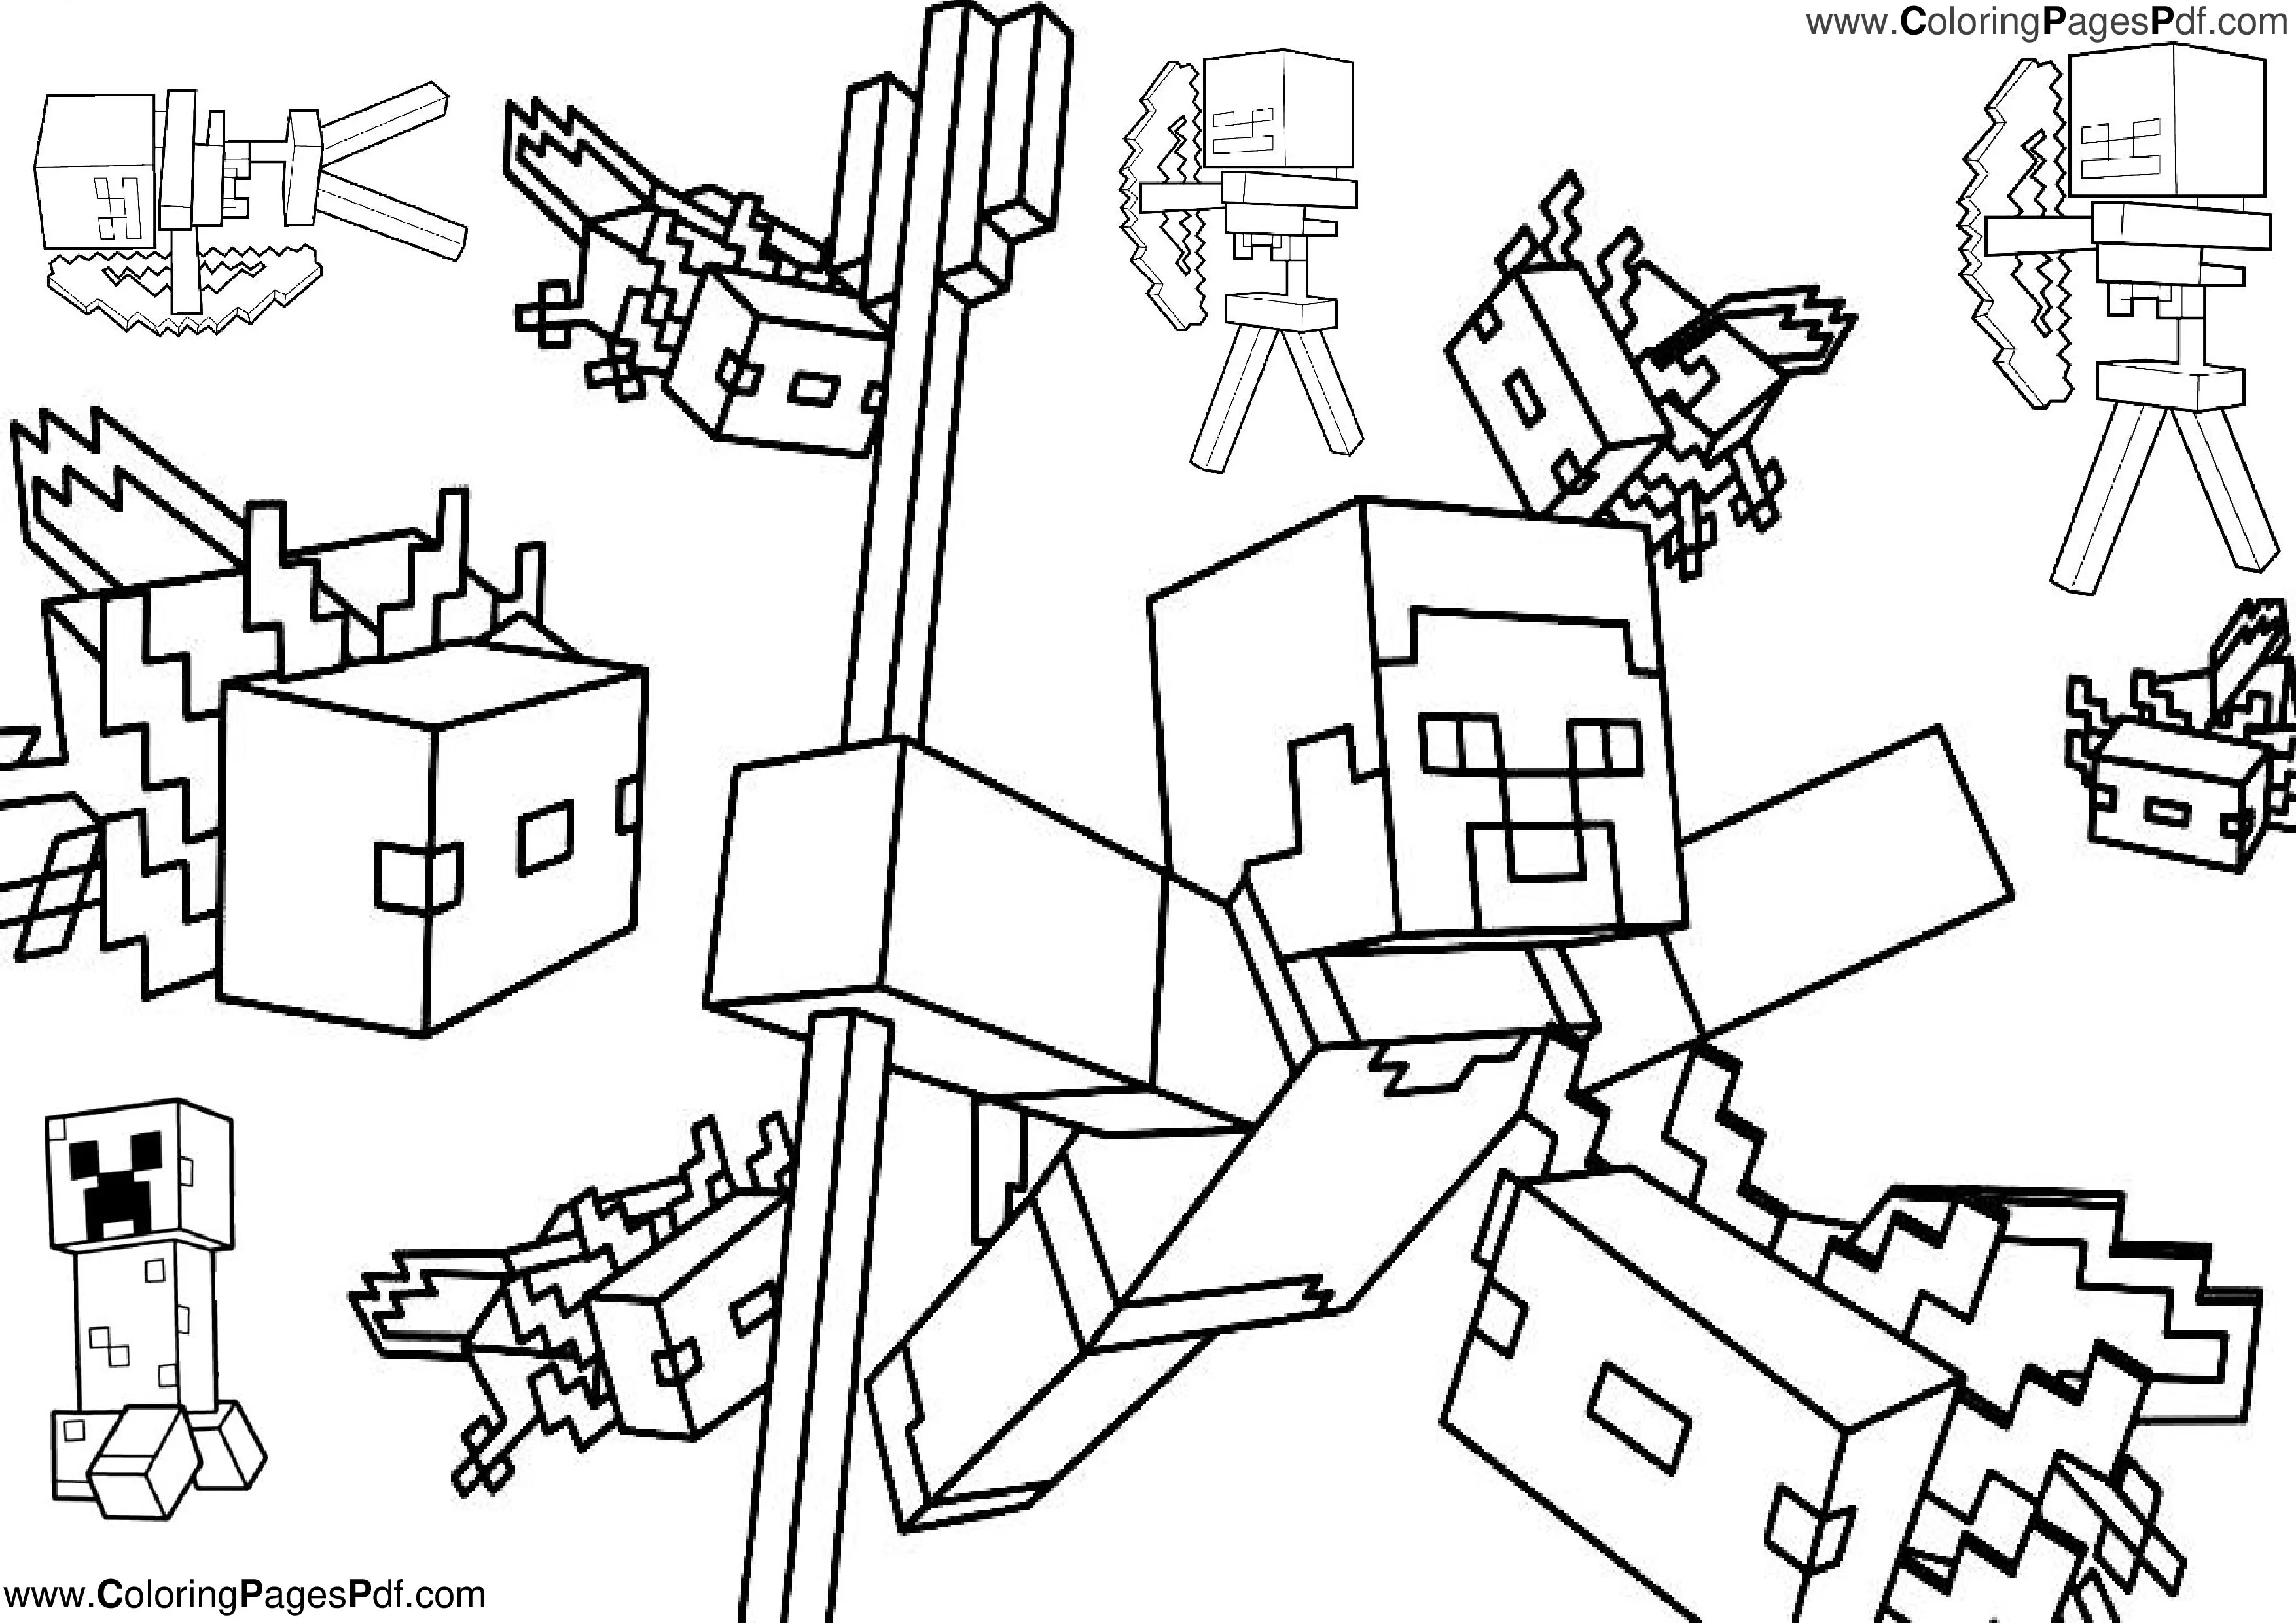 minecraft printable coloring pages,free minecraft coloring pages,free printable minecraft coloring pages,minecraft coloring pages,minecraft coloring sheets,minecraft coloring printables,minecraft printable coloring pages,free minecraft coloring pages,free printable minecraft coloring pages,minecraft coloring pages,minecraft coloring sheets,minecraft coloring printables,cute coloring,peacock coloring,blaze coloring,colour pictures for drawing,batman coloring,lol doll coloring,veggietales coloring pages,animal coloring,ninjago coloring pages,coloring tree,ninjago coloring,ninjago printable,ninjago coloring book